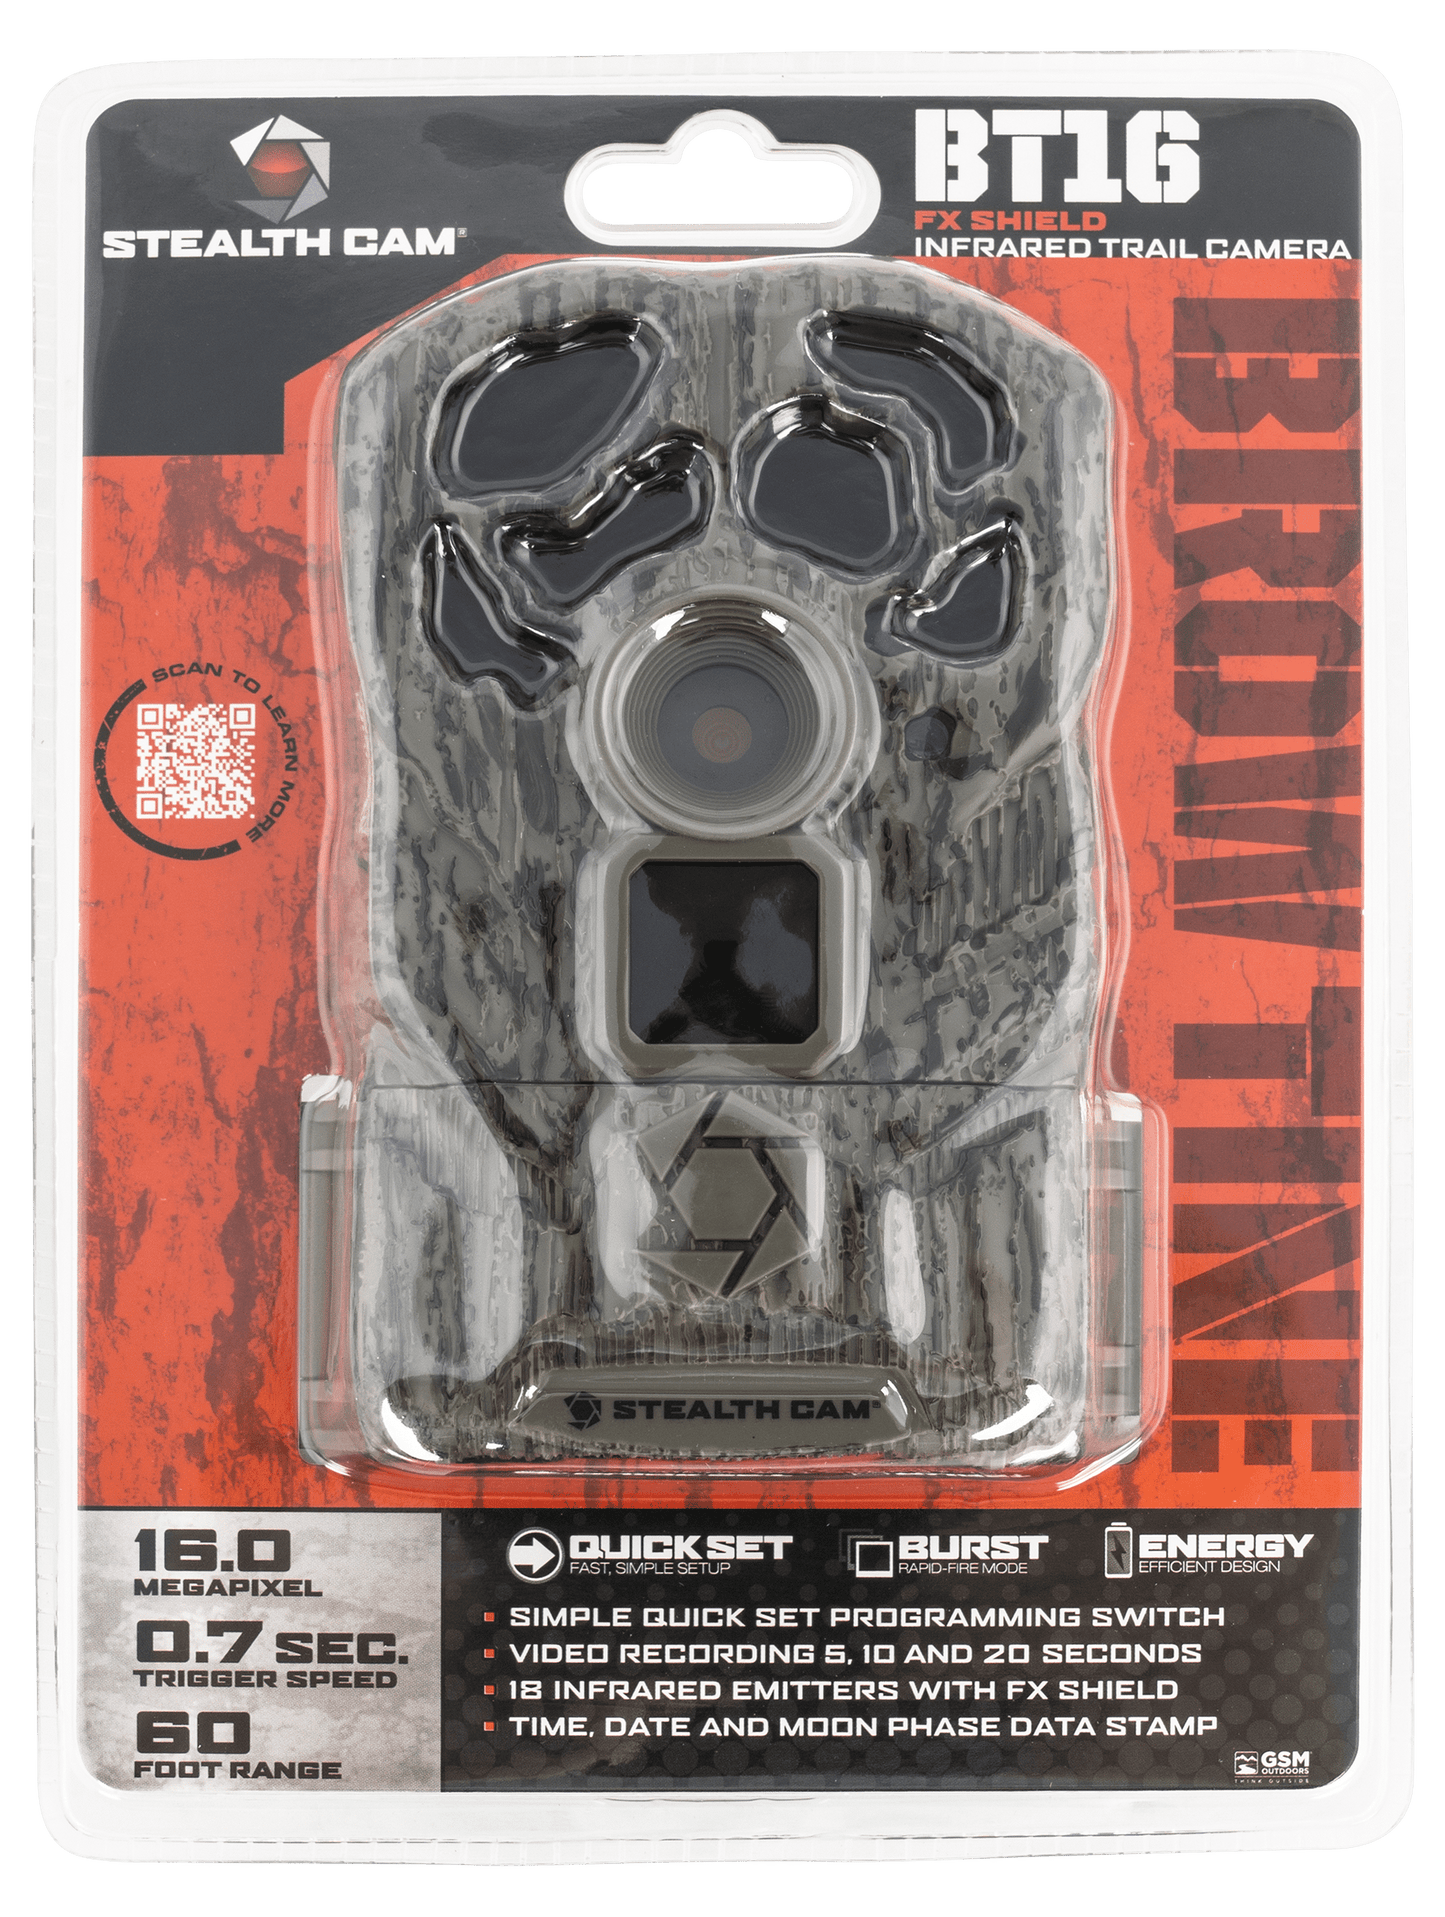 Stealth Cam Trail Camera - Browtine 16mp/480 Video by Texas Fowlers